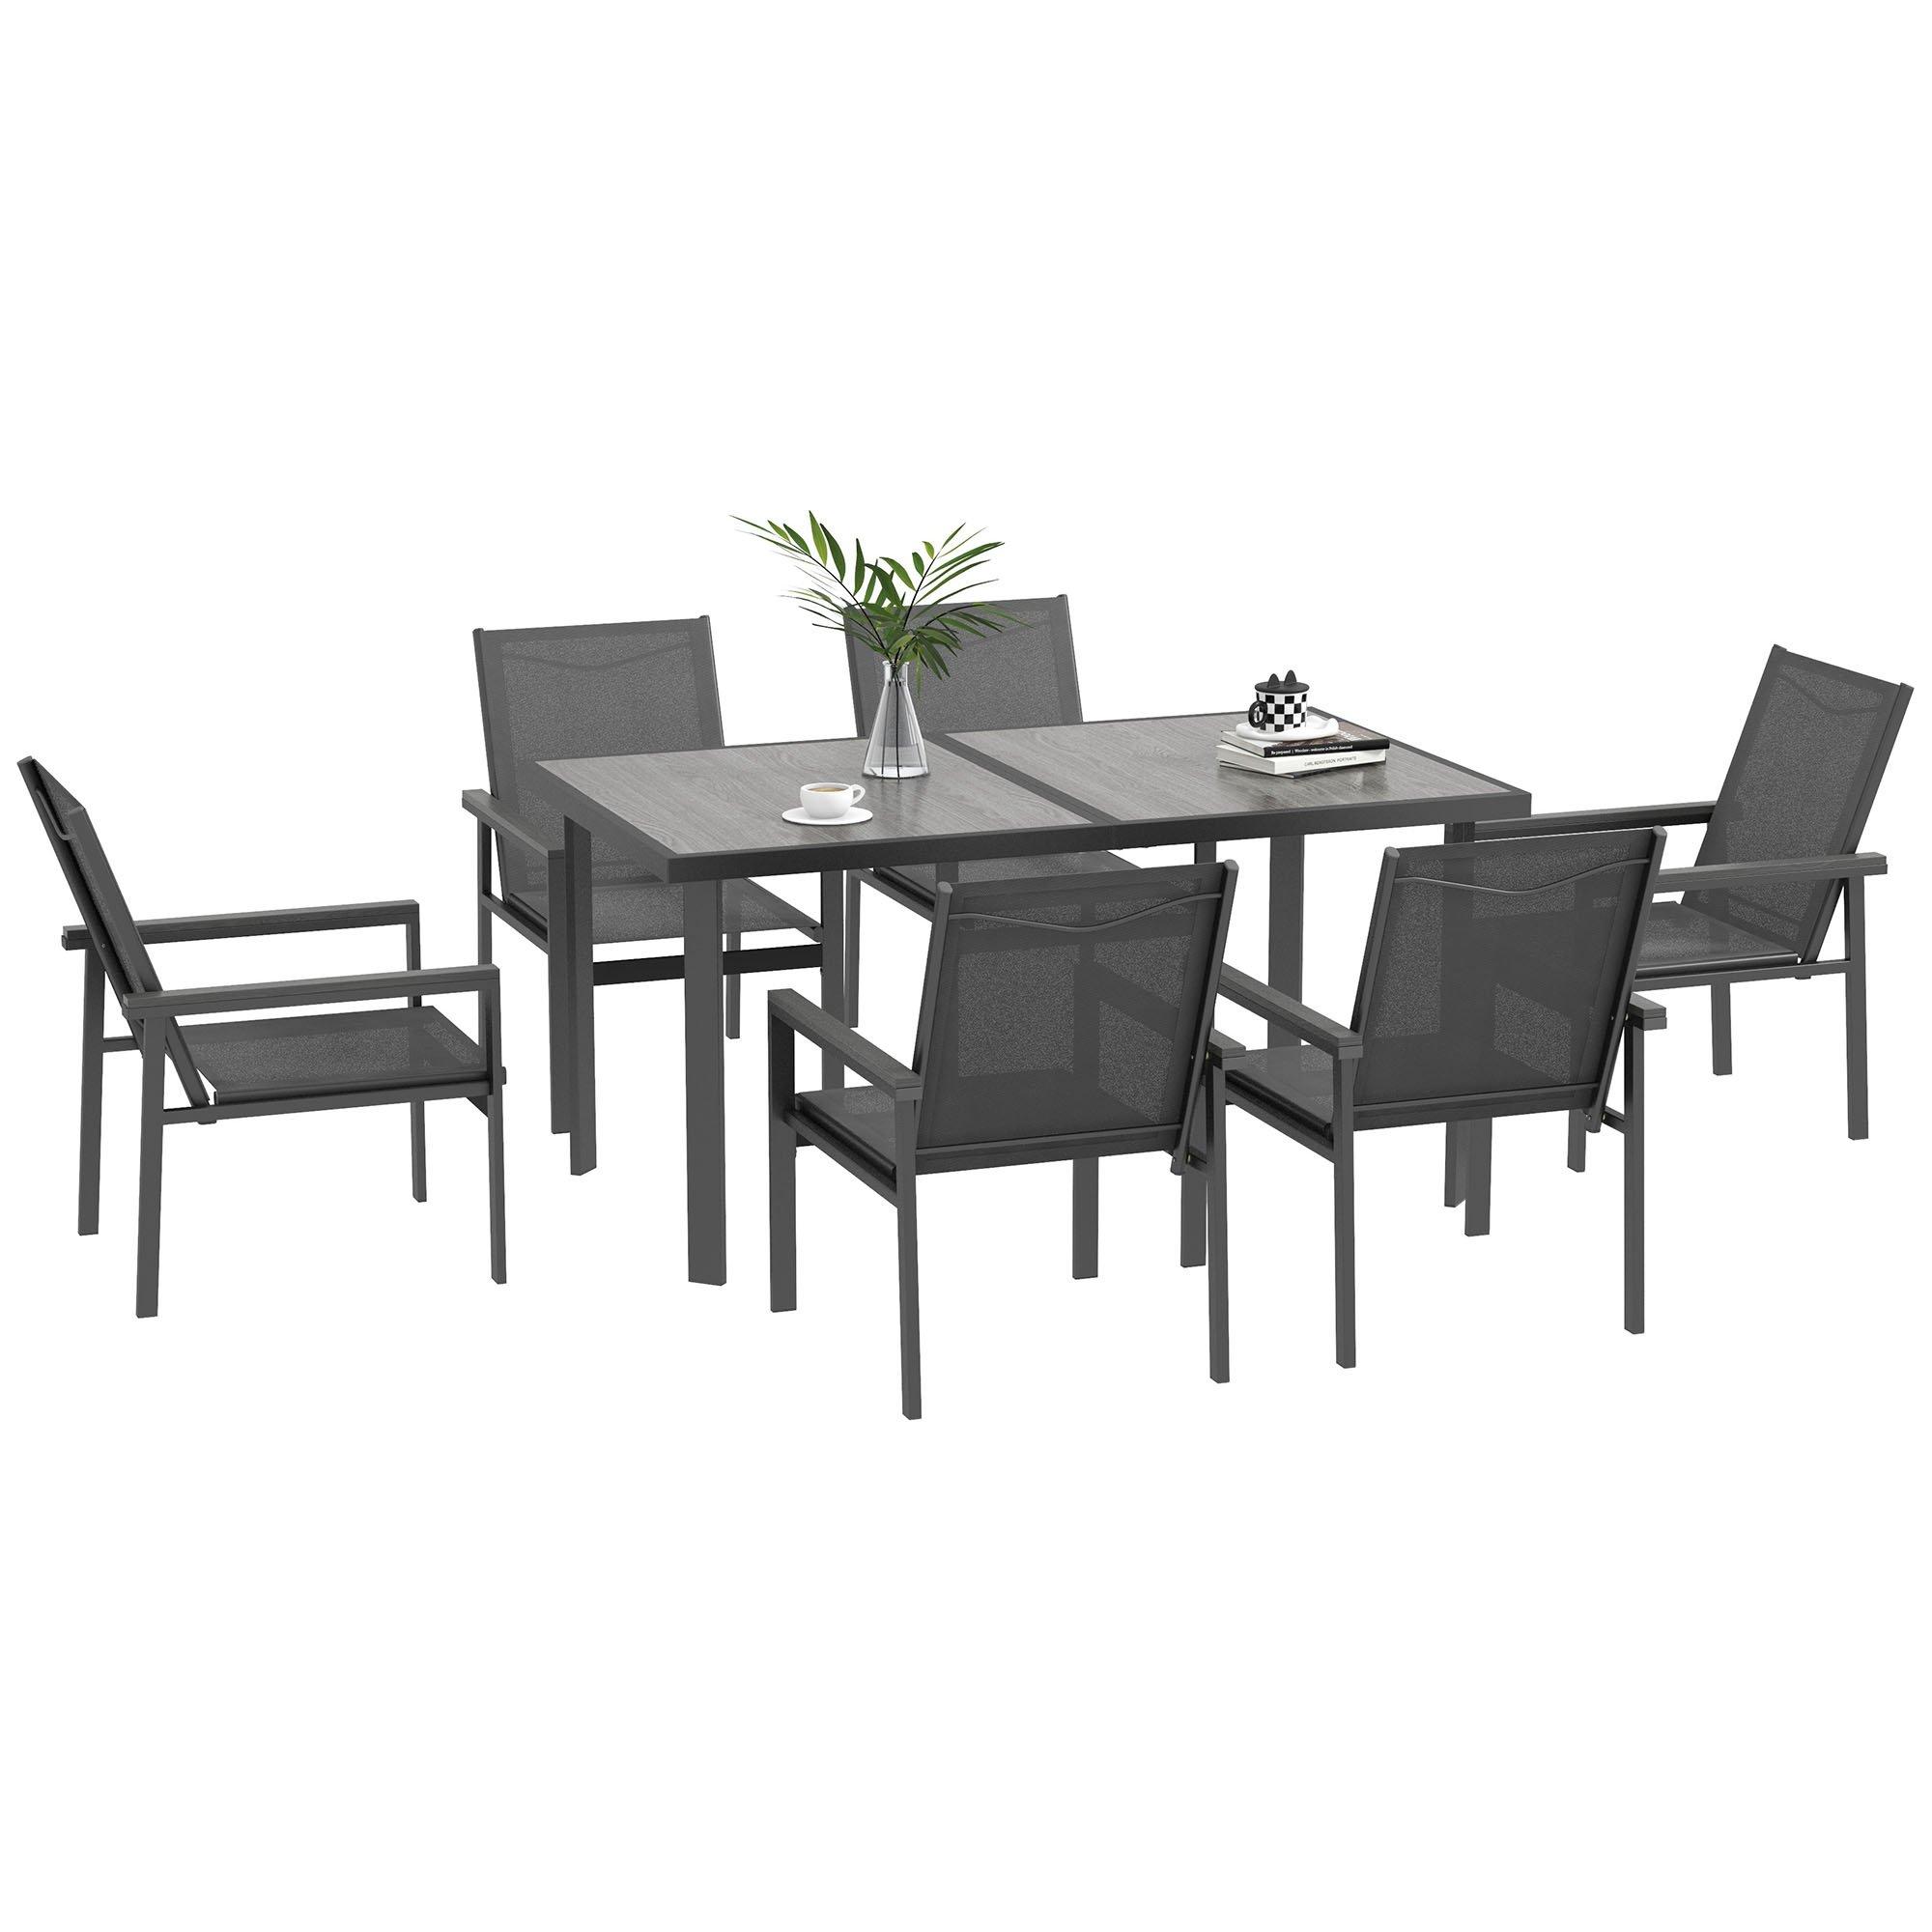 7 Pieces Outdoor Dining Table and 6 Armchairs, Garden Dining Set, Grey